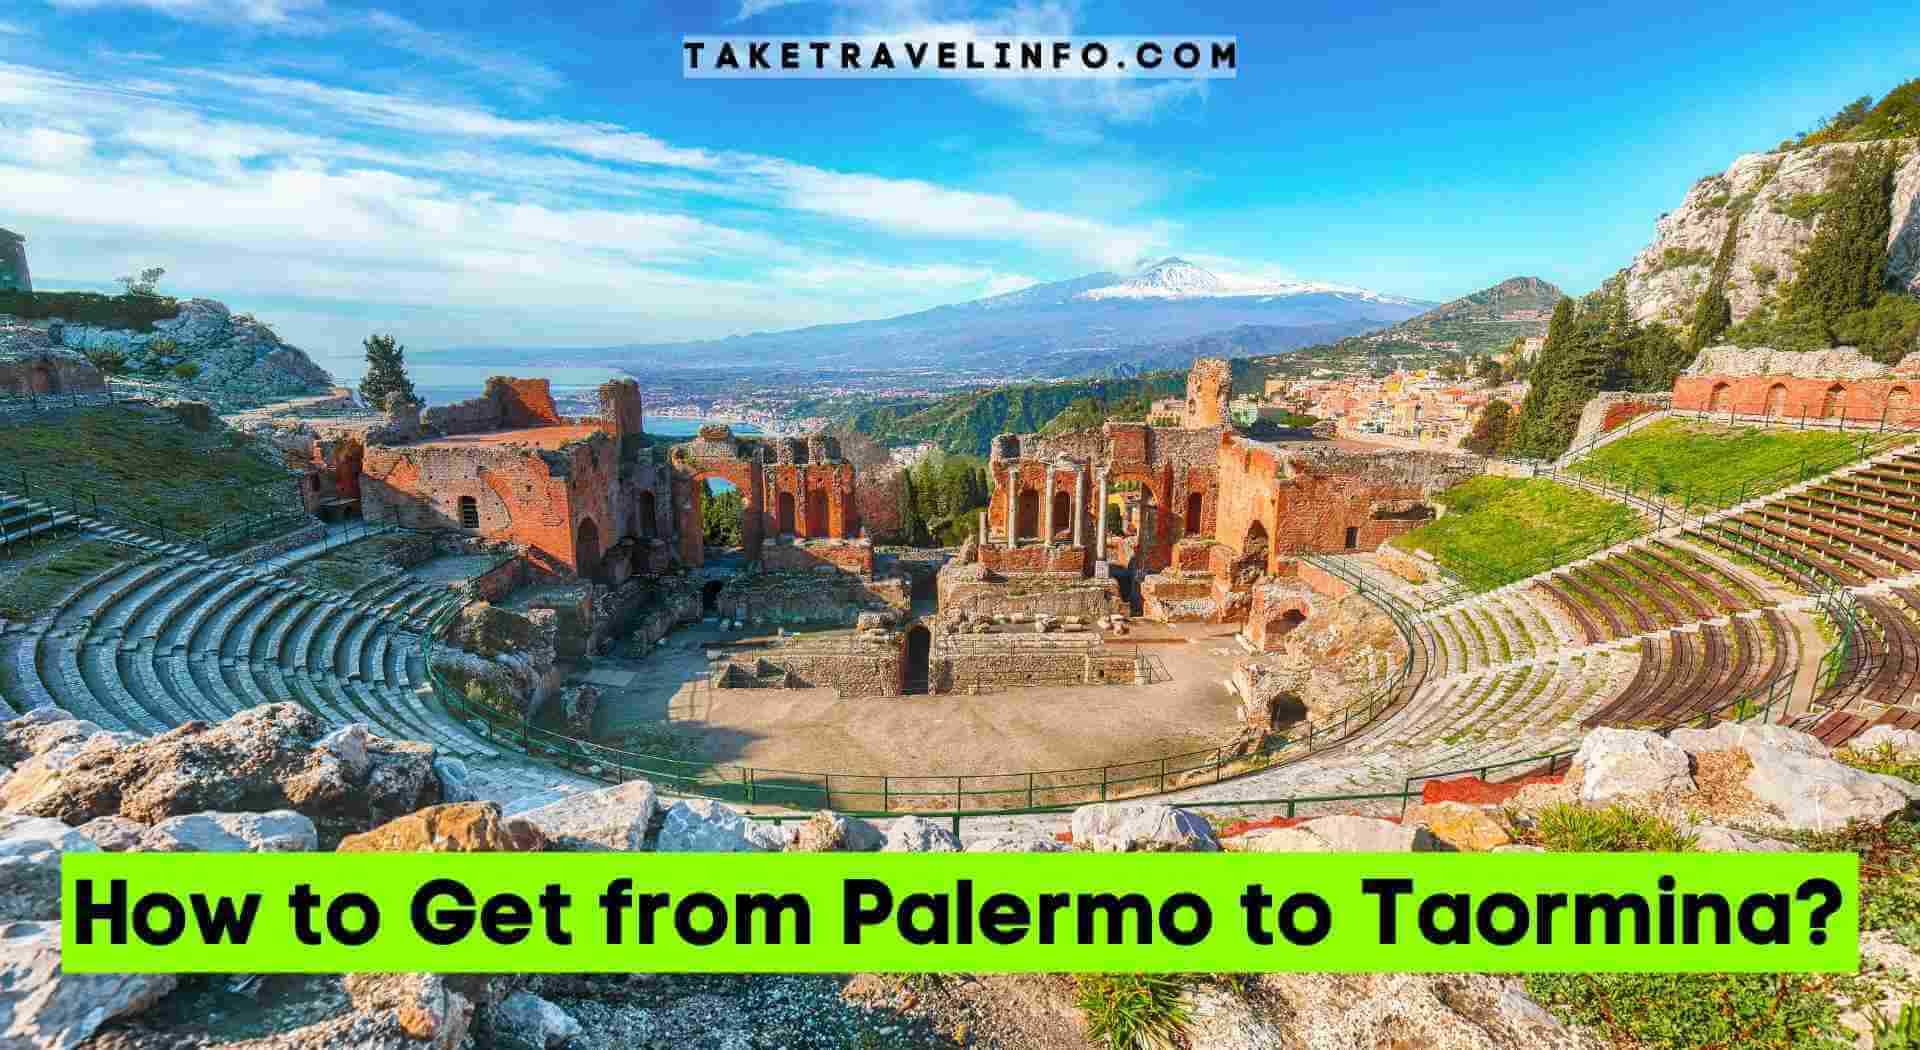 How to Get from Palermo to Taormina